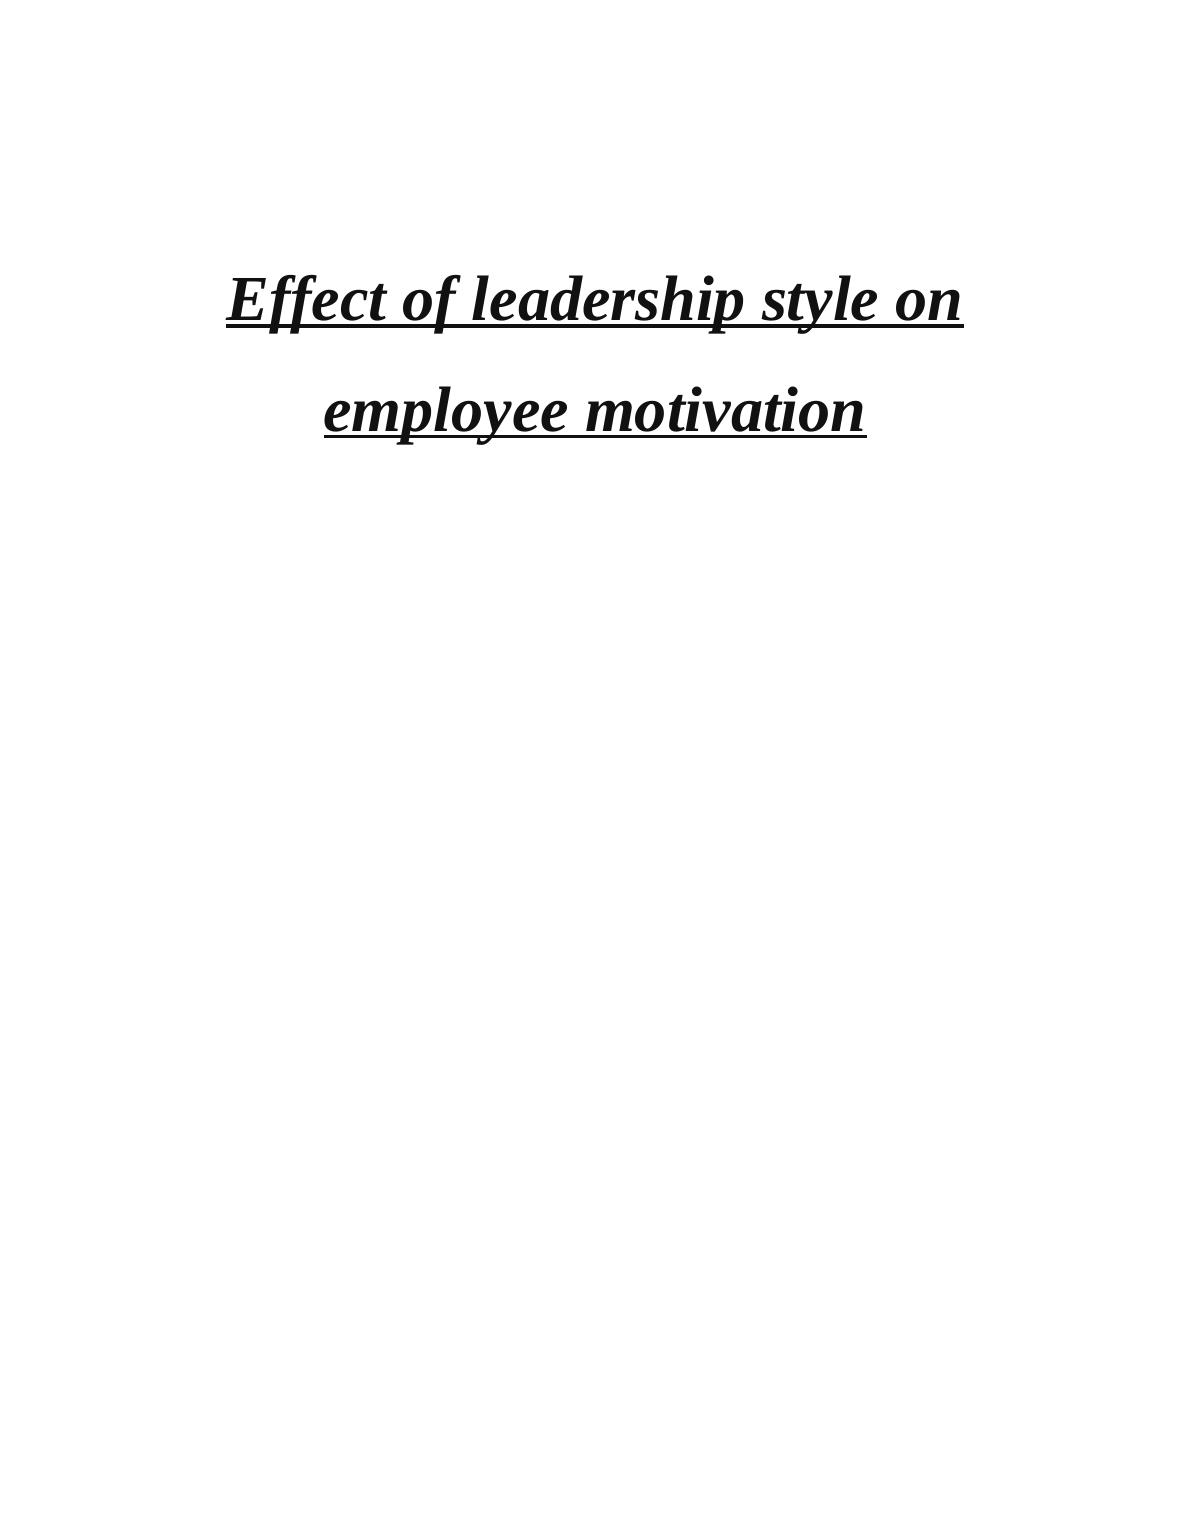 The Effects of Leadership Styles on Employee Motivation_1